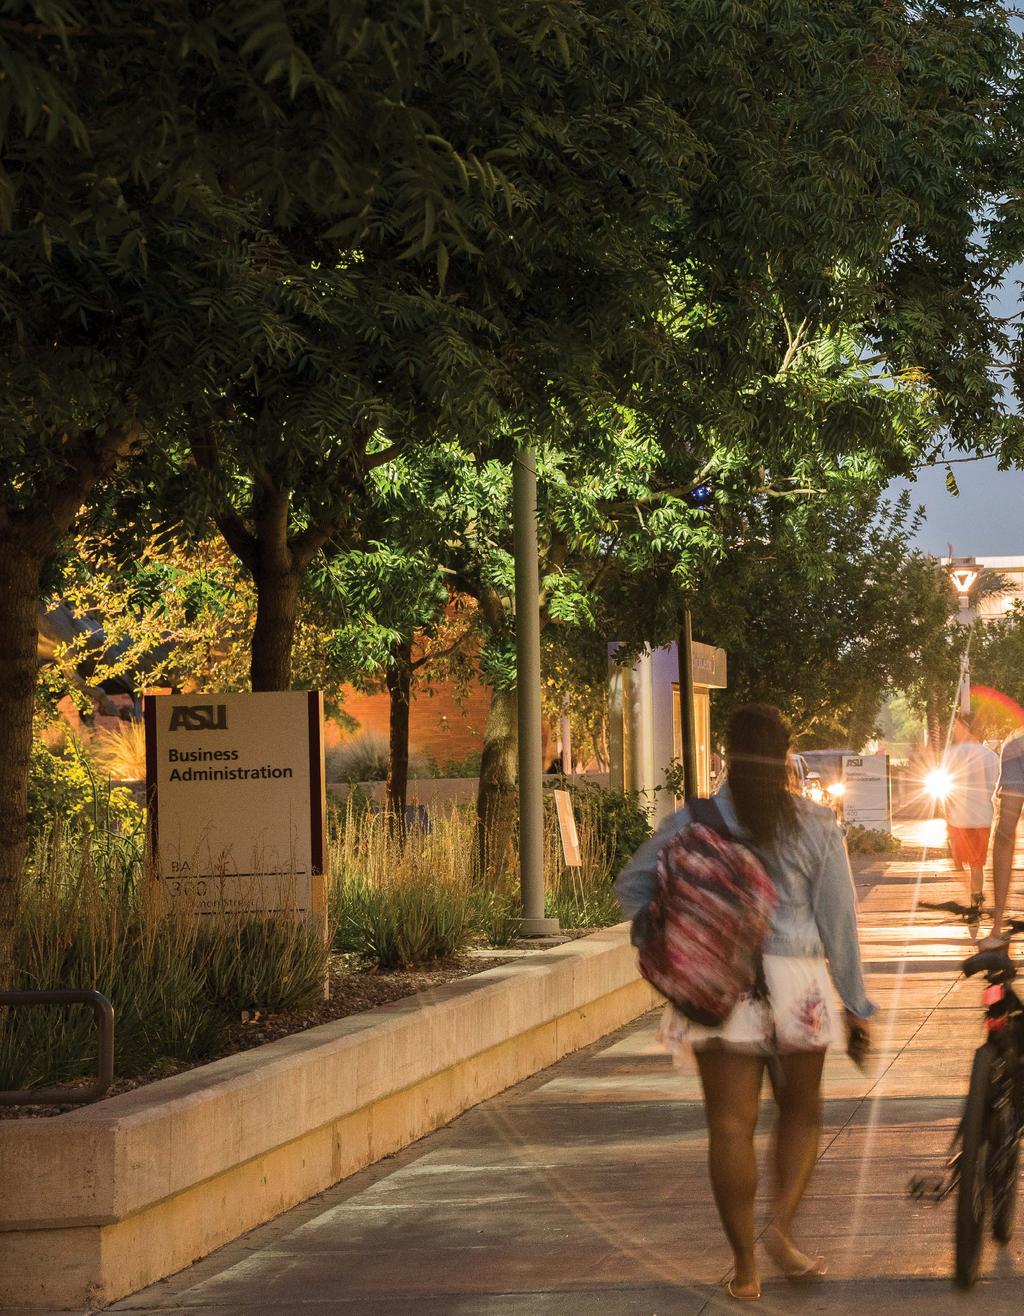 Online resources Get connected with W. P. Carey and ASU before you visit campus. Rely on our online resources to post jobs, schedule an event, and more.